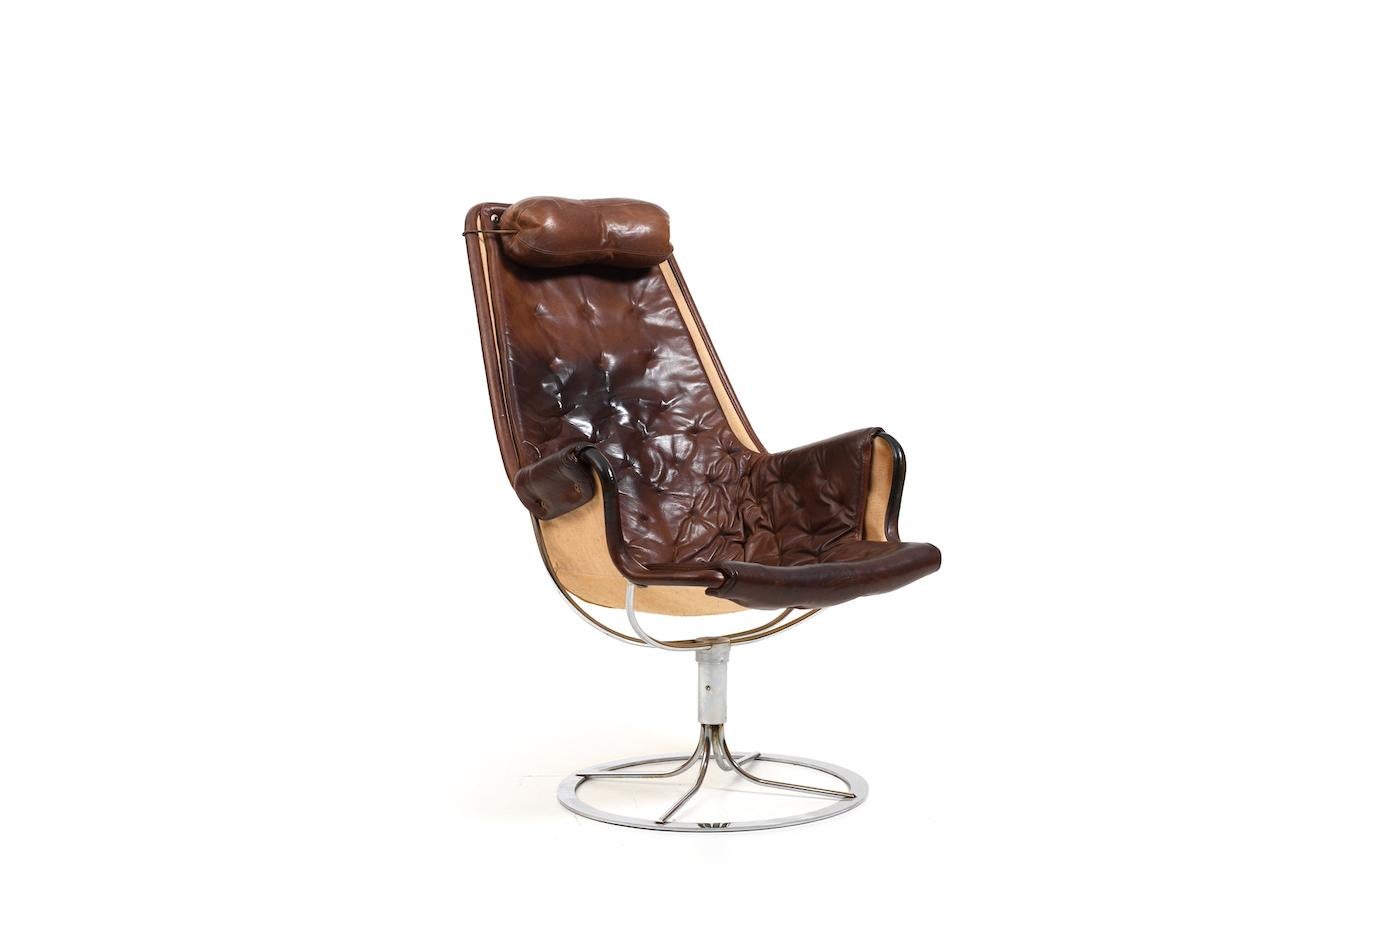 Jetson chair by Bruno Mathsson 1969 for DUX sweden. With brown patinated leather and chromed swivel base. Early 1970s. In original condition.